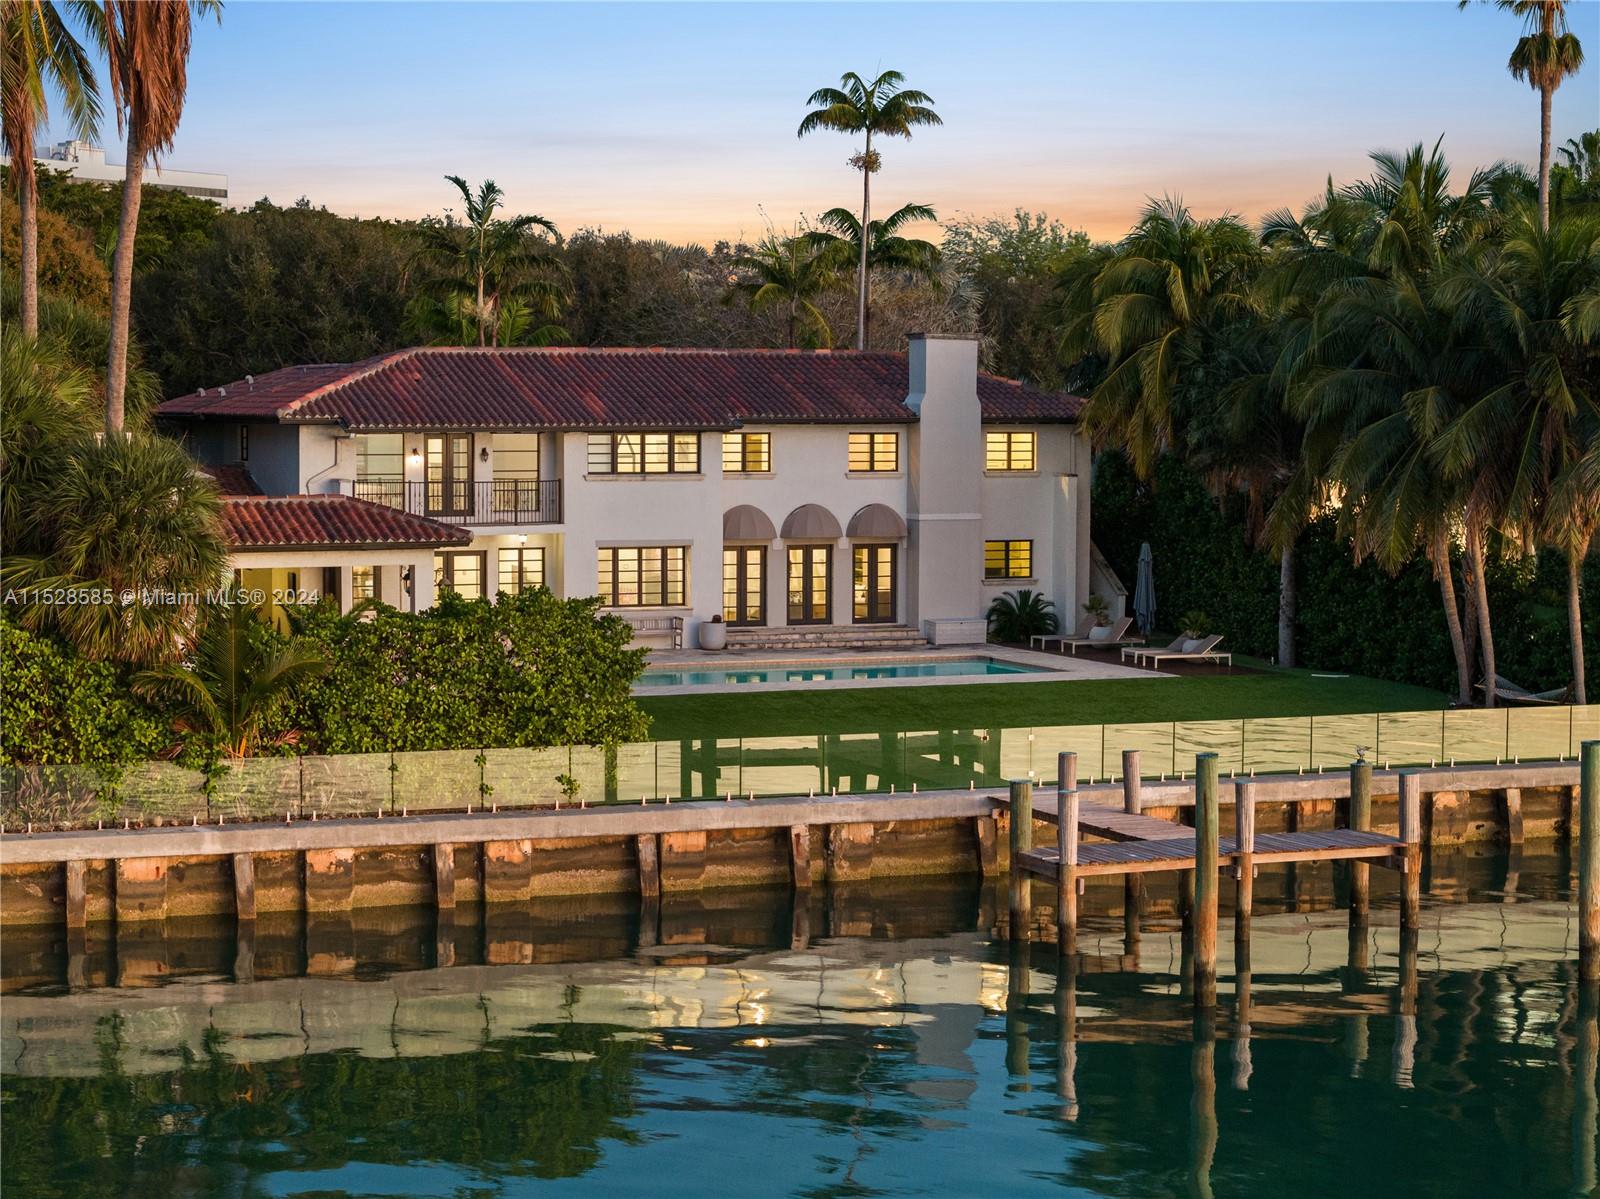 Spanish Mediterranean Architectural beauty on gated & private Bay point .  Enjoy dramatic yet serene sunrise open bay views w/ 120’ of WF on a 23,100sf on the Bay.  This 6,560sf, 7 bed waterfront home w/ covered cabana, 3 car garage features a large pool, covered barbecue area & storage room. Beautifully landscaped , gated property providing shade & privacy. Oversized primary suite w/ separate sitting area walk-in closet and bathrooms with balcony overlooking patio. Stunning foyer, high ceilings with curved staircase and herring bone wood floors. 4bed upstairs all w/ water views & midnight bar, nanny room, guest suite & large den on ground floor. Home is wired for surround sound & security cameras. Minutes to Downtown, Design District, airport, top schools & vibrant night-life.